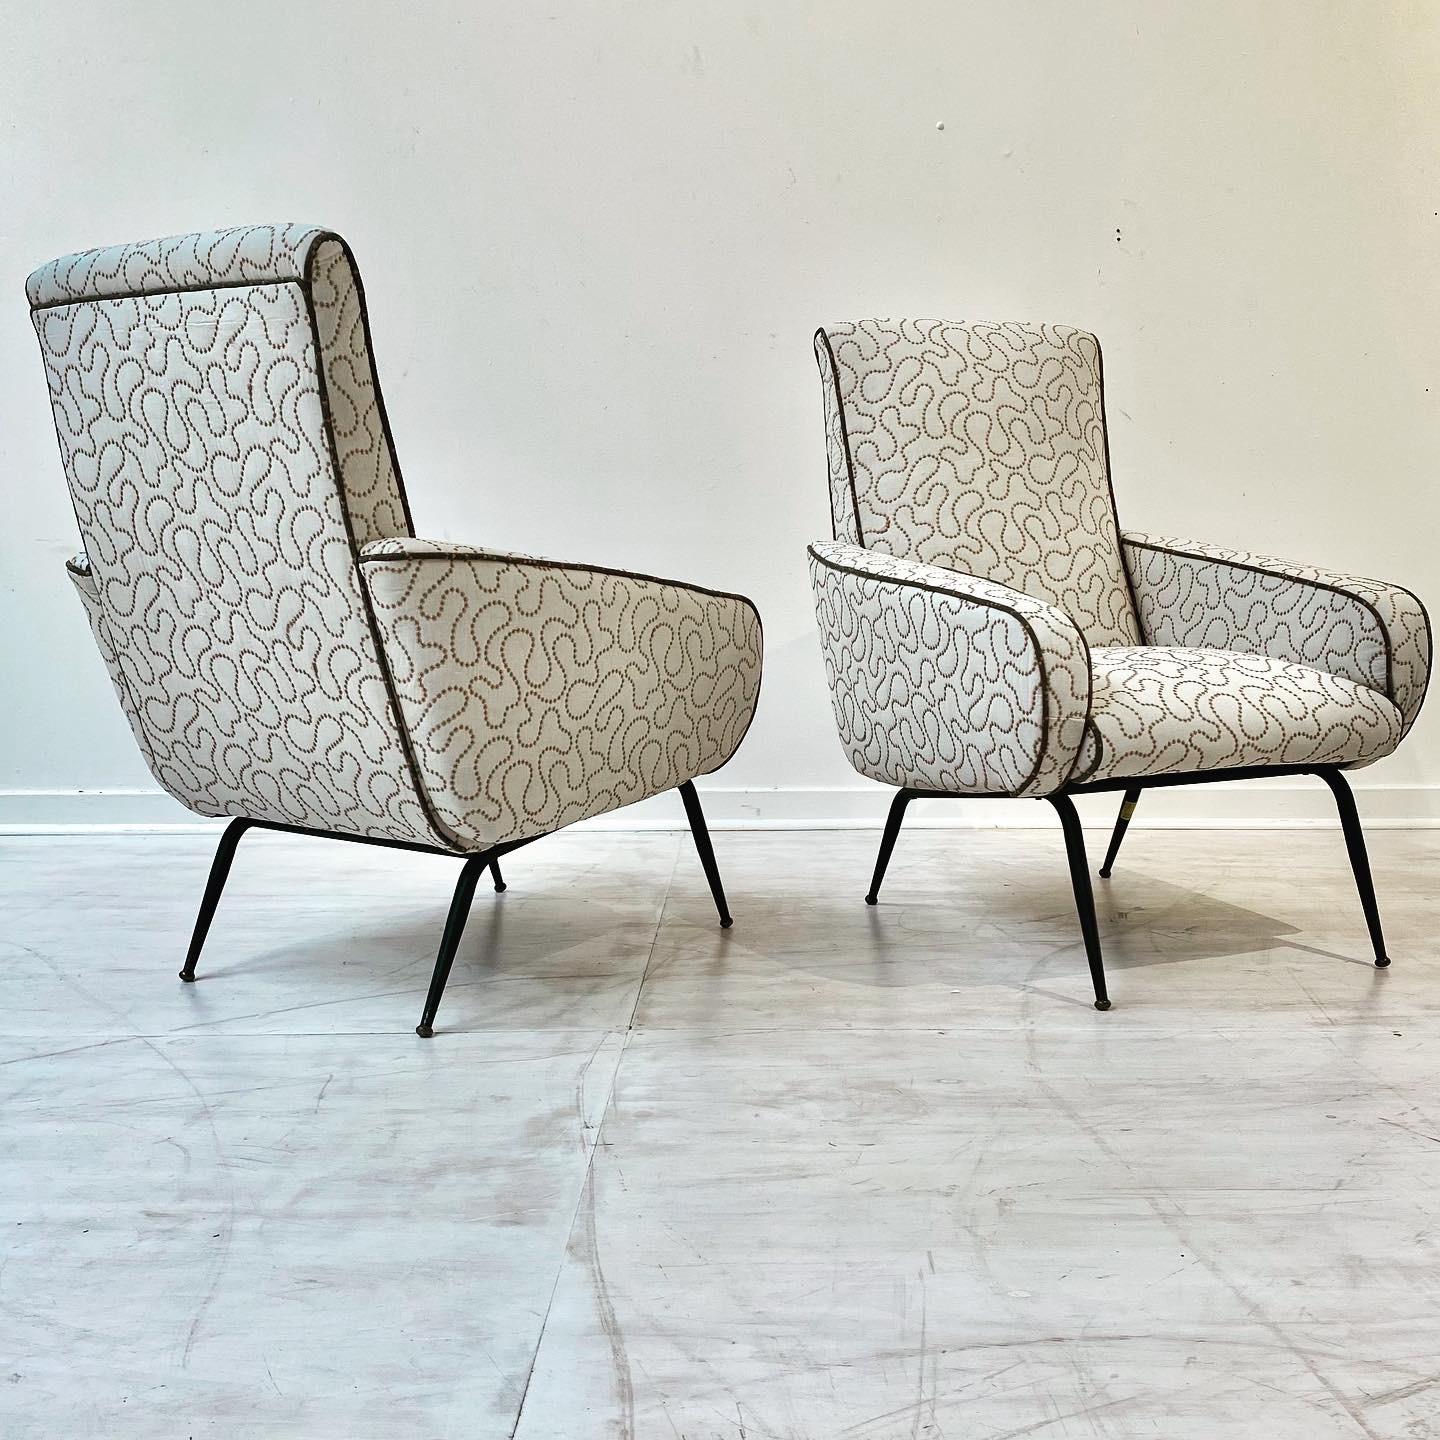 Midcentury Italian lounge chairs with new upholstery.